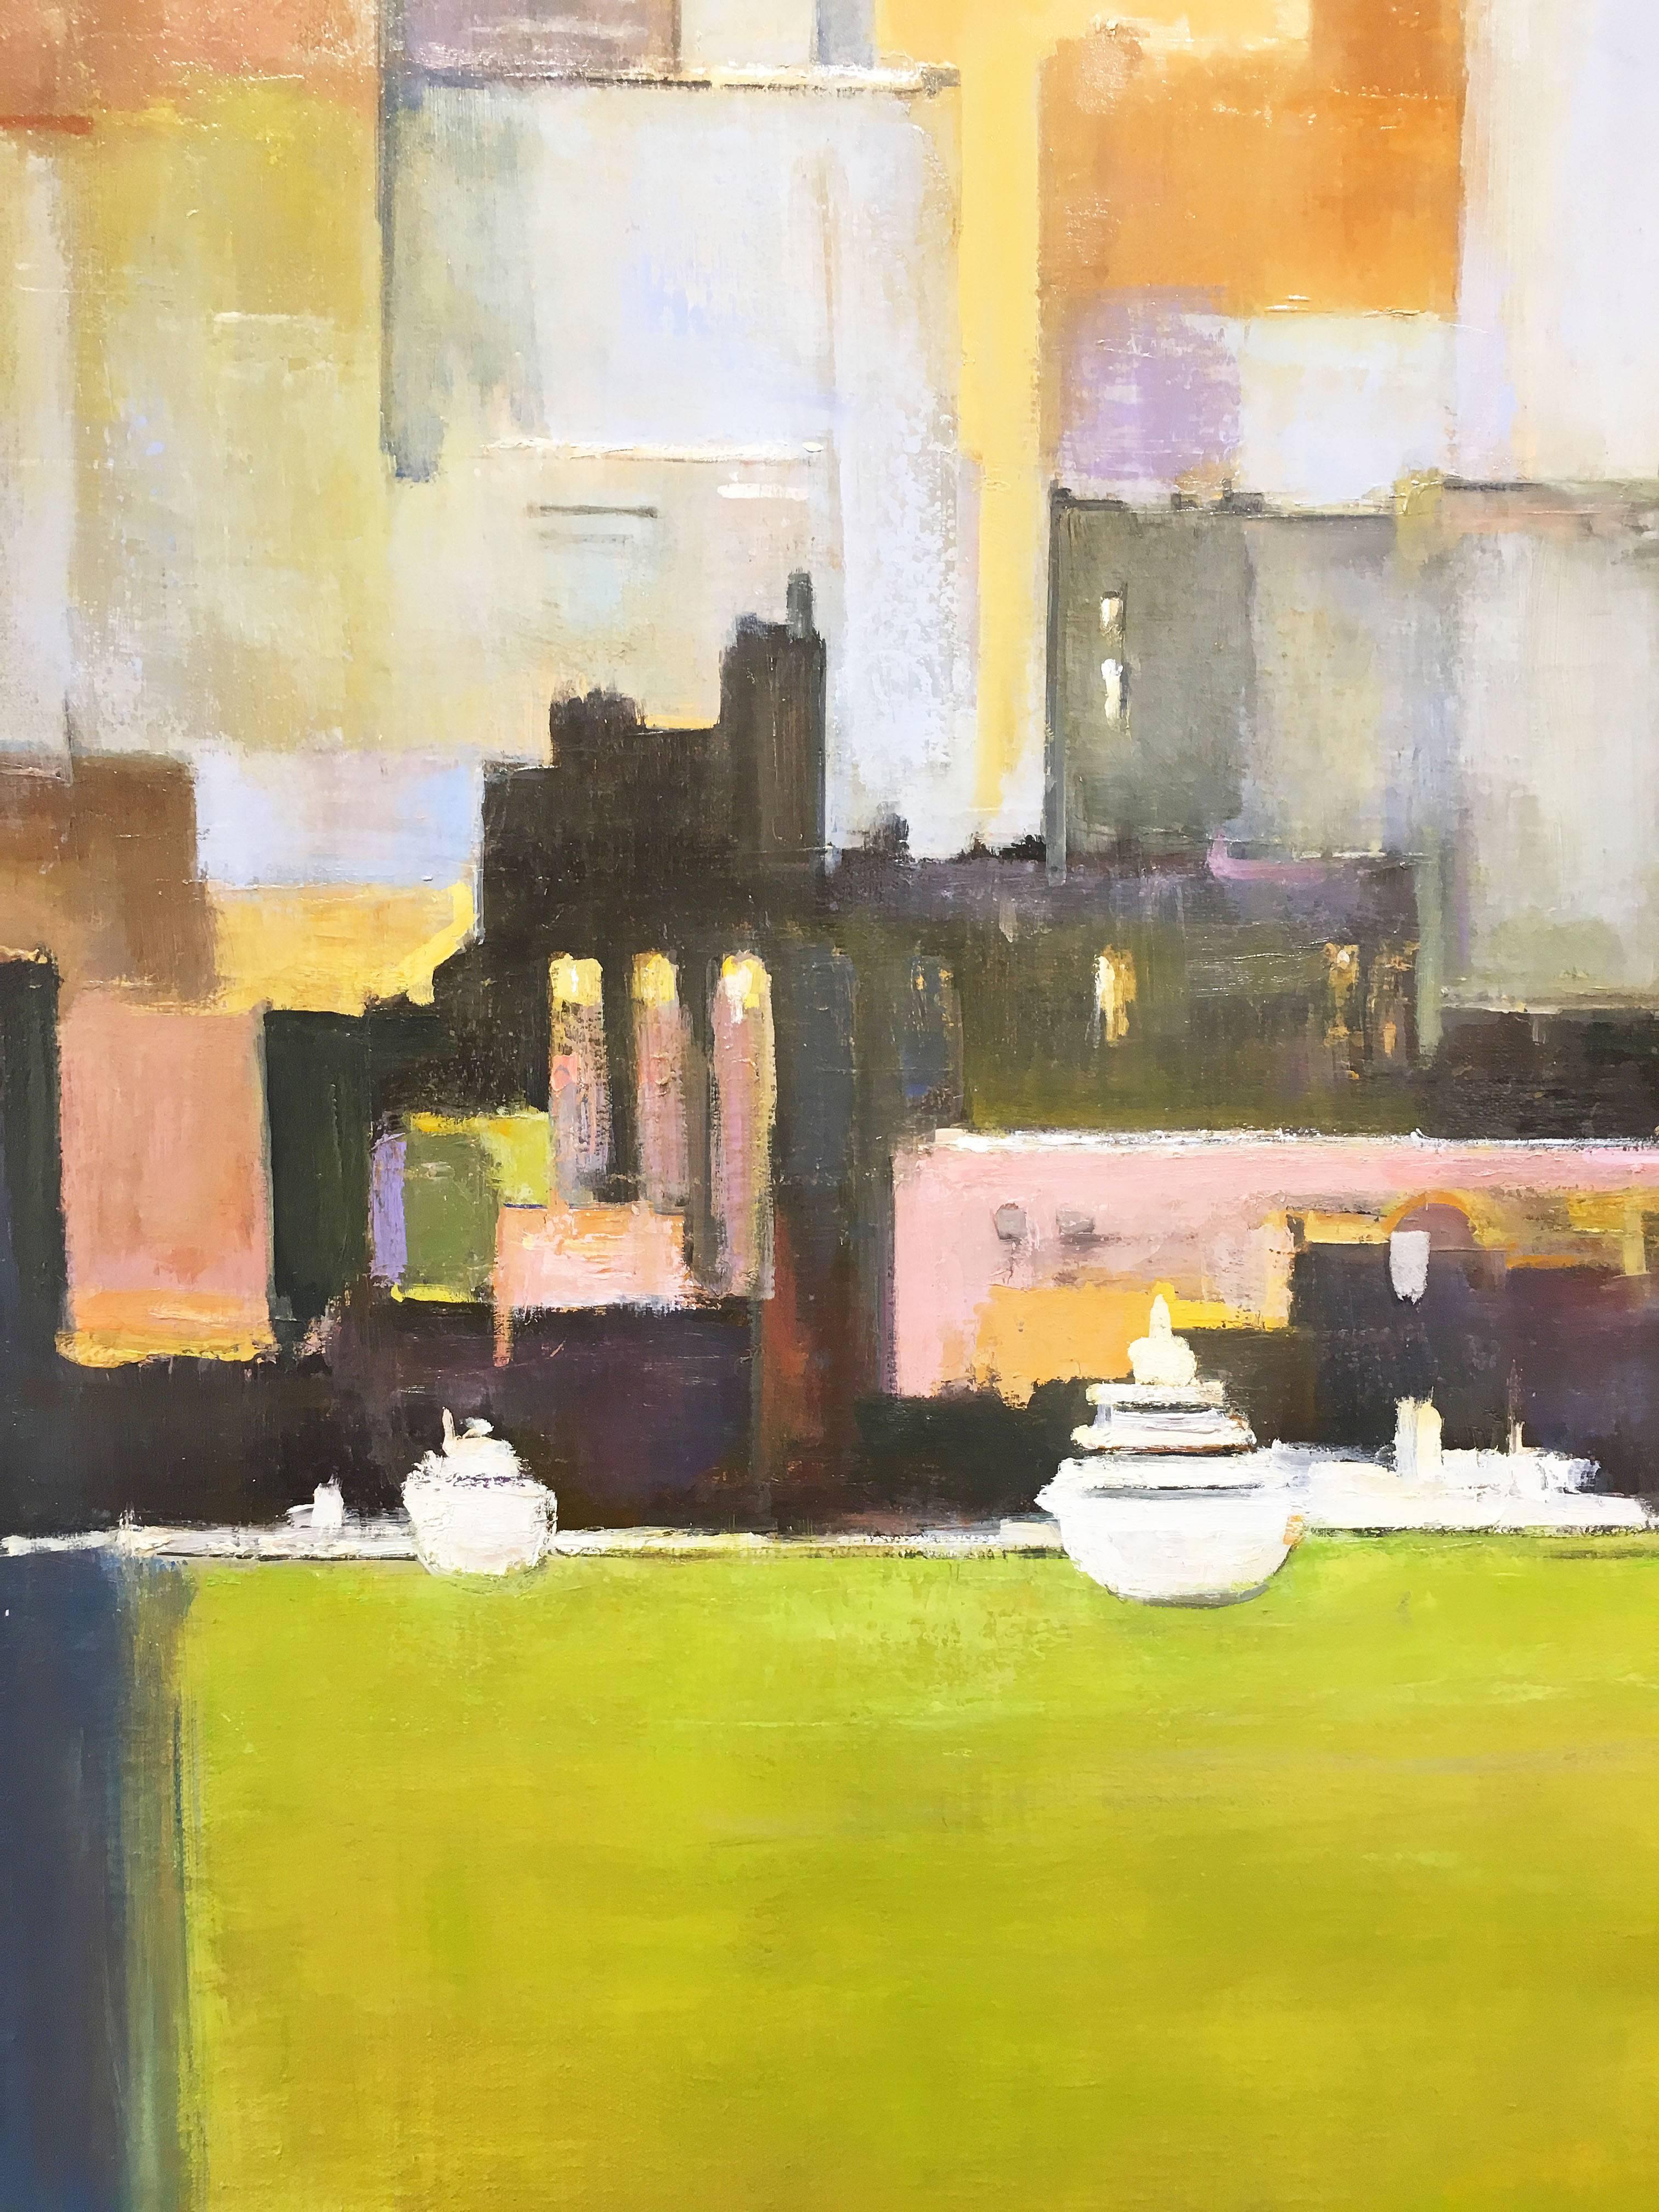 'Ships At Dock, New York' 2017 by American artist, Lawrence Kelsey. Oil on canvas, 30 x 36 in. / Handmade gold frame: 39 x 32.75 in. This painting features NYC's waterfront with skyscrapers hovering over the ships below. Combining figuration and